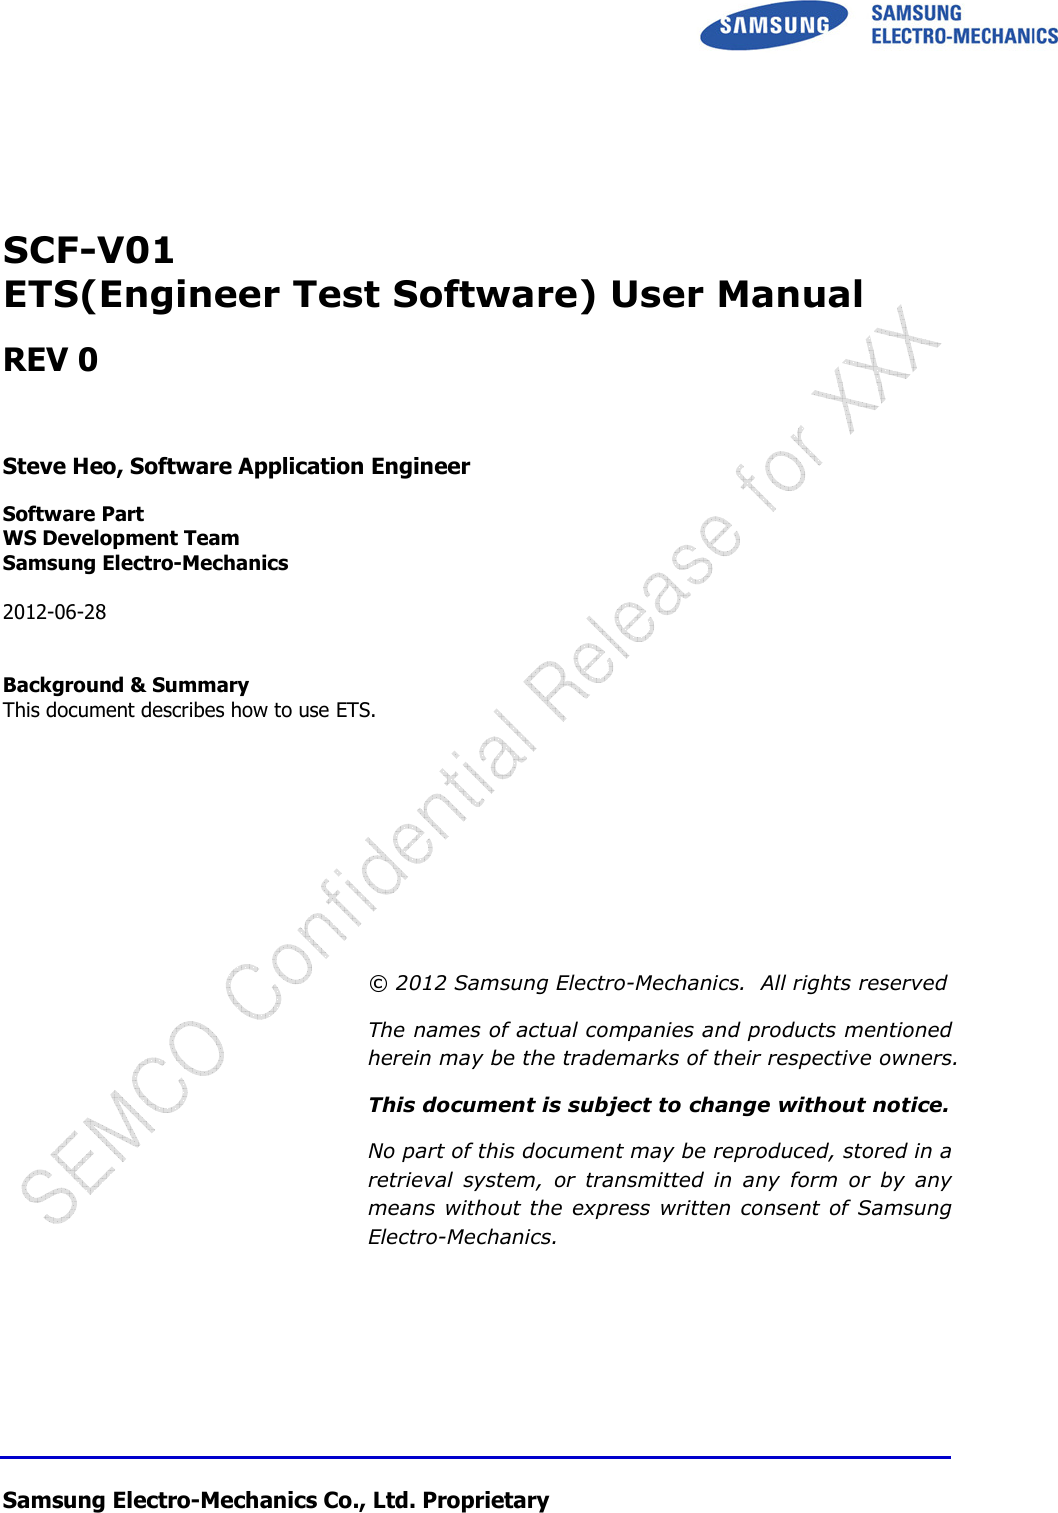  Samsung Electro-Mechanics Co., Ltd. Proprietary       SCF-V01 ETS(Engineer Test Software) User Manual  REV 0    Steve Heo, Software Application Engineer  Software Part WS Development Team  Samsung Electro-Mechanics  2012-06-28   Background &amp; Summary This document describes how to use ETS.           © 2012 Samsung Electro-Mechanics.  All rights reserved The names of actual companies and products mentioned herein may be the trademarks of their respective owners. This document is subject to change without notice. No part of this document may be reproduced, stored in a retrieval  system,  or  transmitted  in  any  form  or  by  any means without the express written consent of Samsung Electro-Mechanics. 